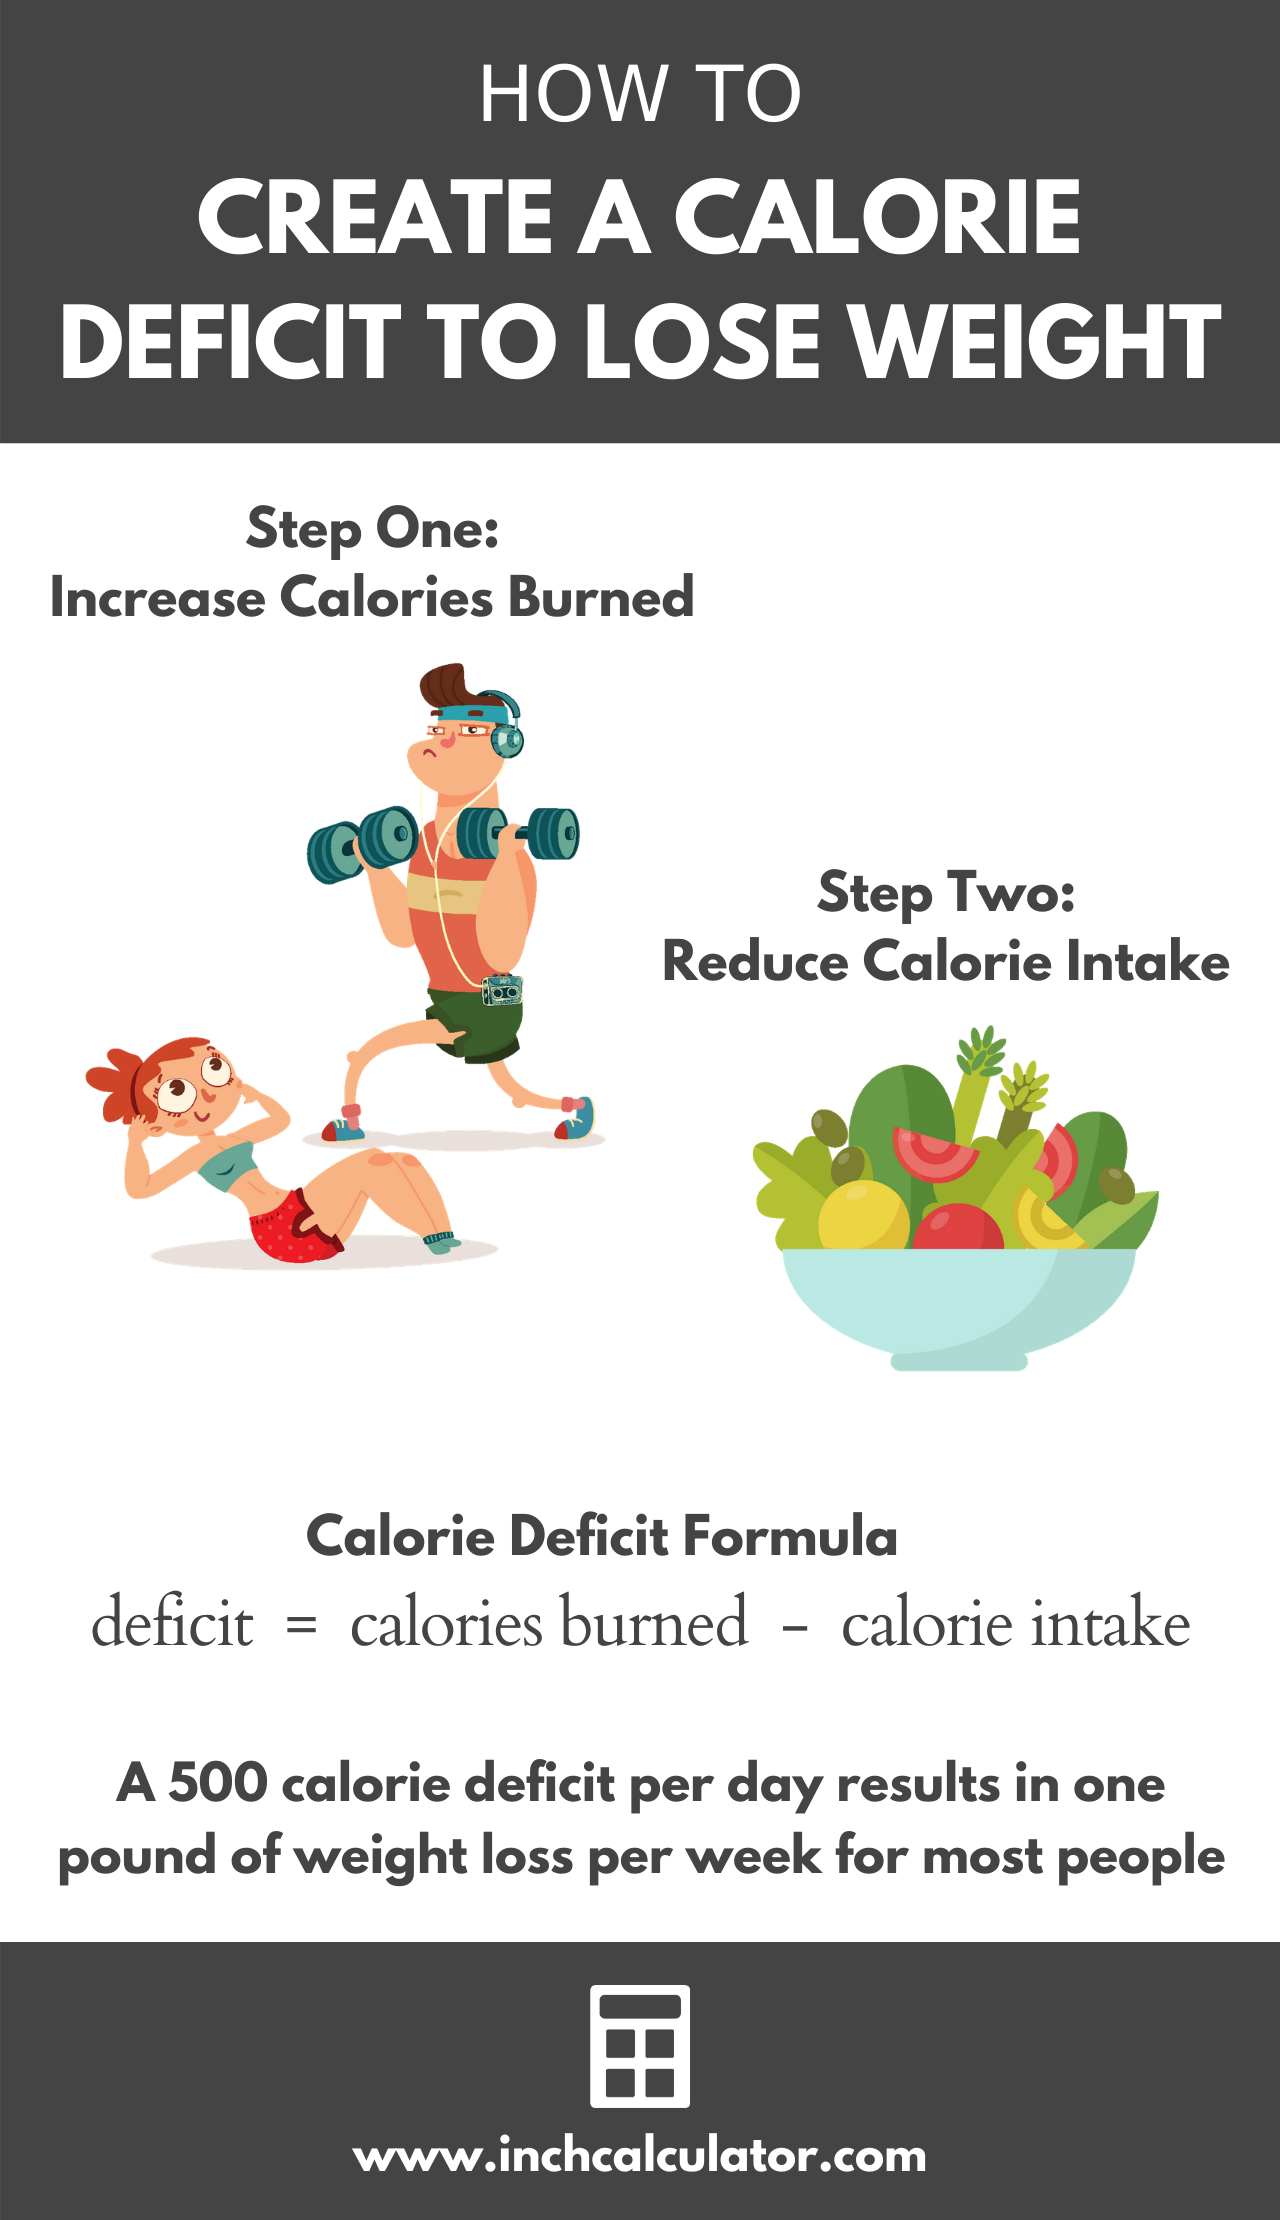 Infographic showing how to calculate a calorie deficit to lose weight